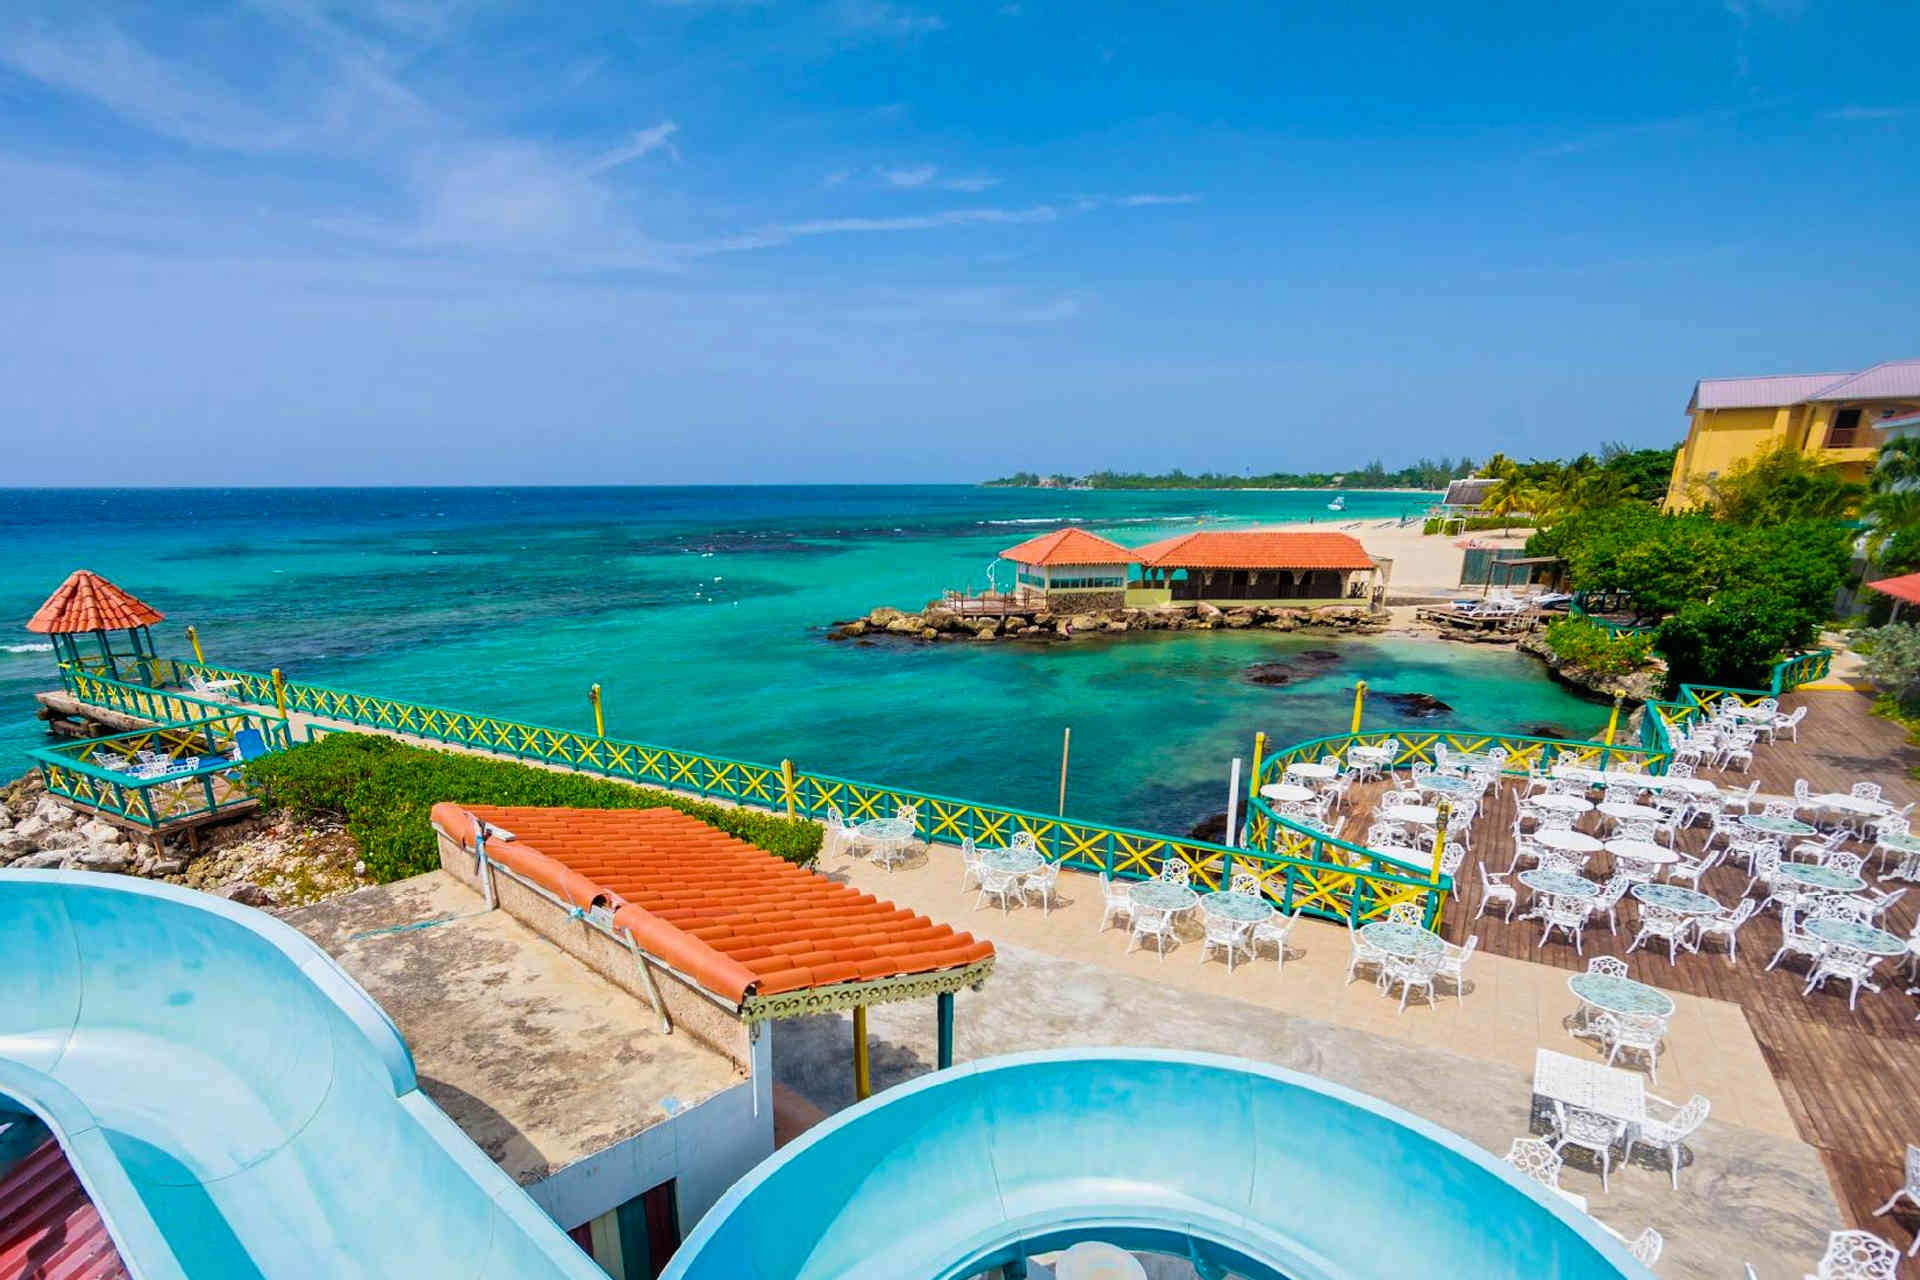 18 Best Caribbean AllInclusive Resorts for Families 2020